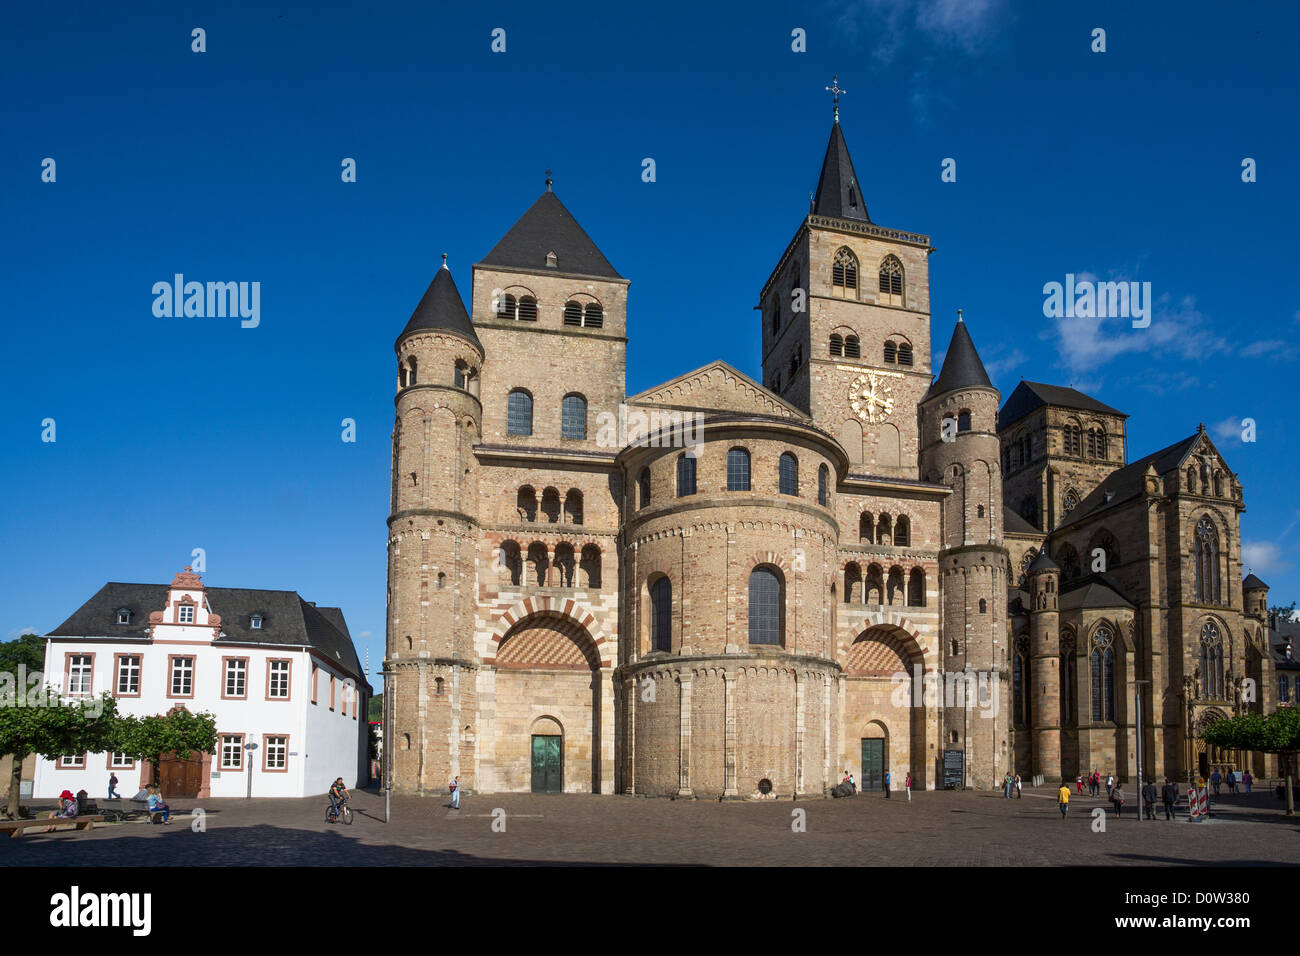 Germany, Europe, travel, Trier, Dome, Cathedral, architecture, church, colourful, history, religion, roman, skyline, square, Une Stock Photo